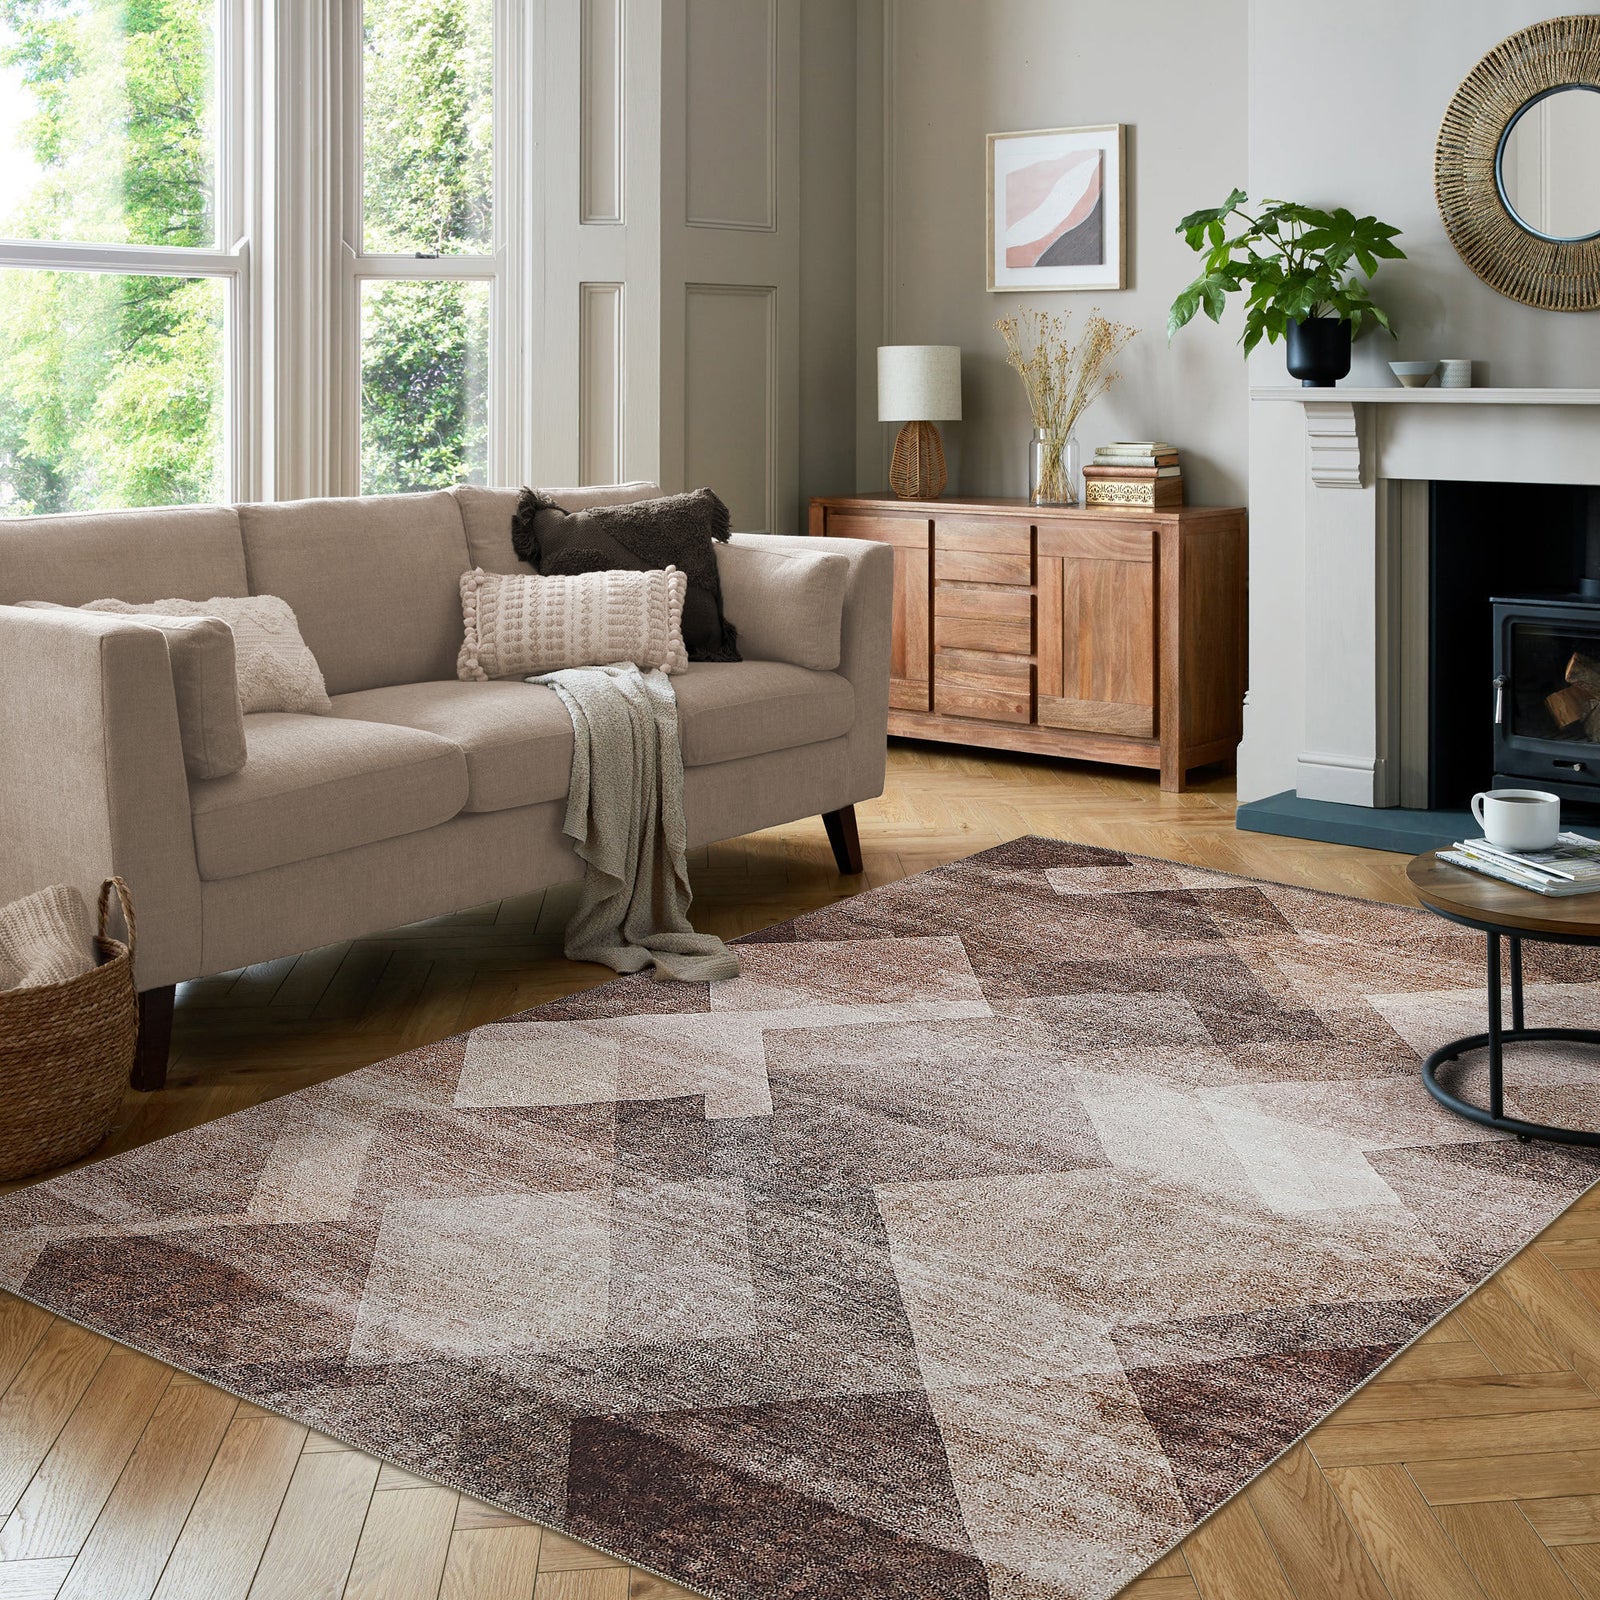 4' X 6' Brown Geometric Stain Resistant Area Rug